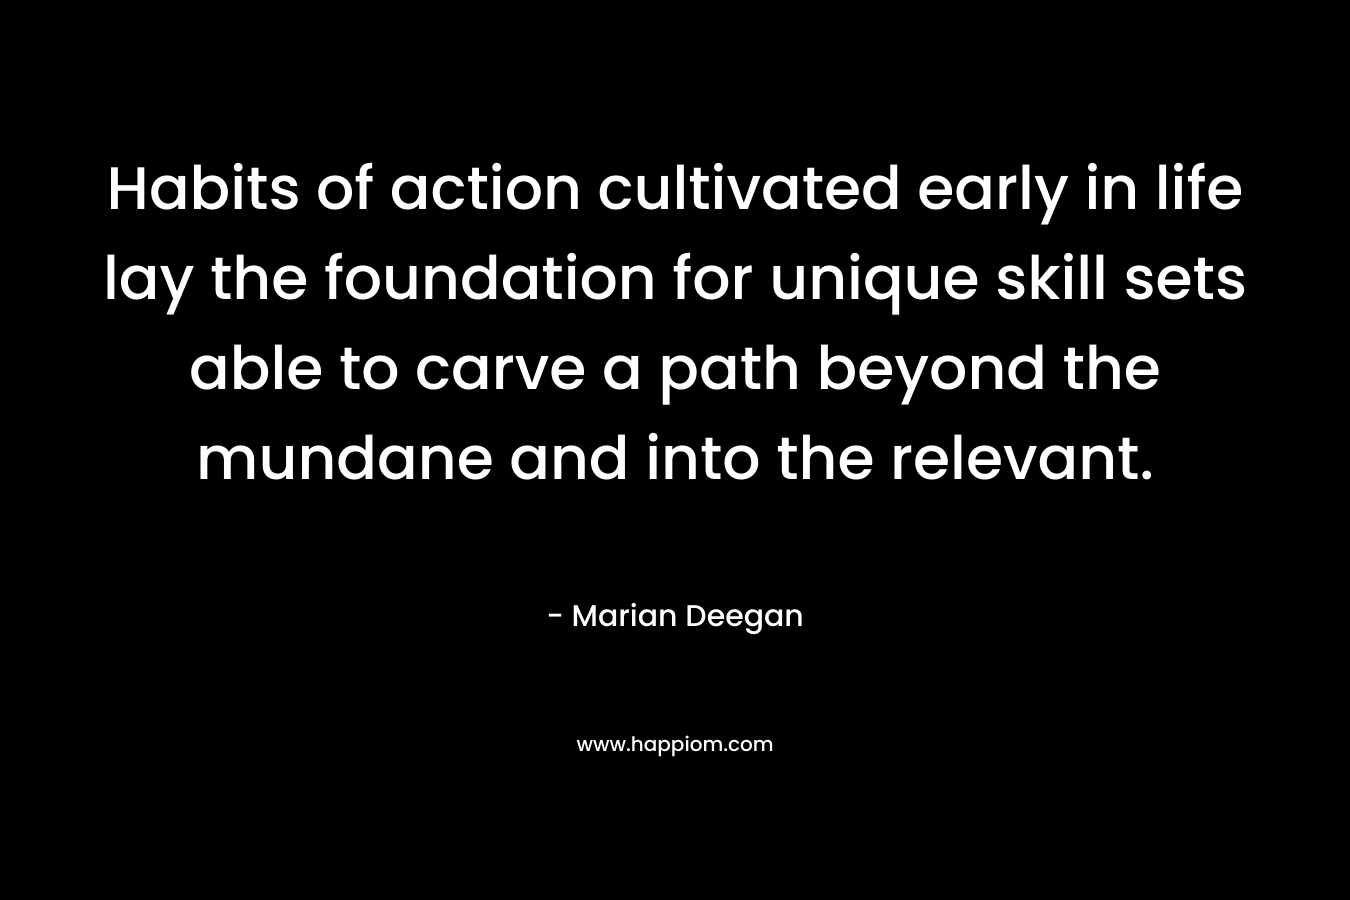 Habits of action cultivated early in life lay the foundation for unique skill sets able to carve a path beyond the mundane and into the relevant. – Marian Deegan